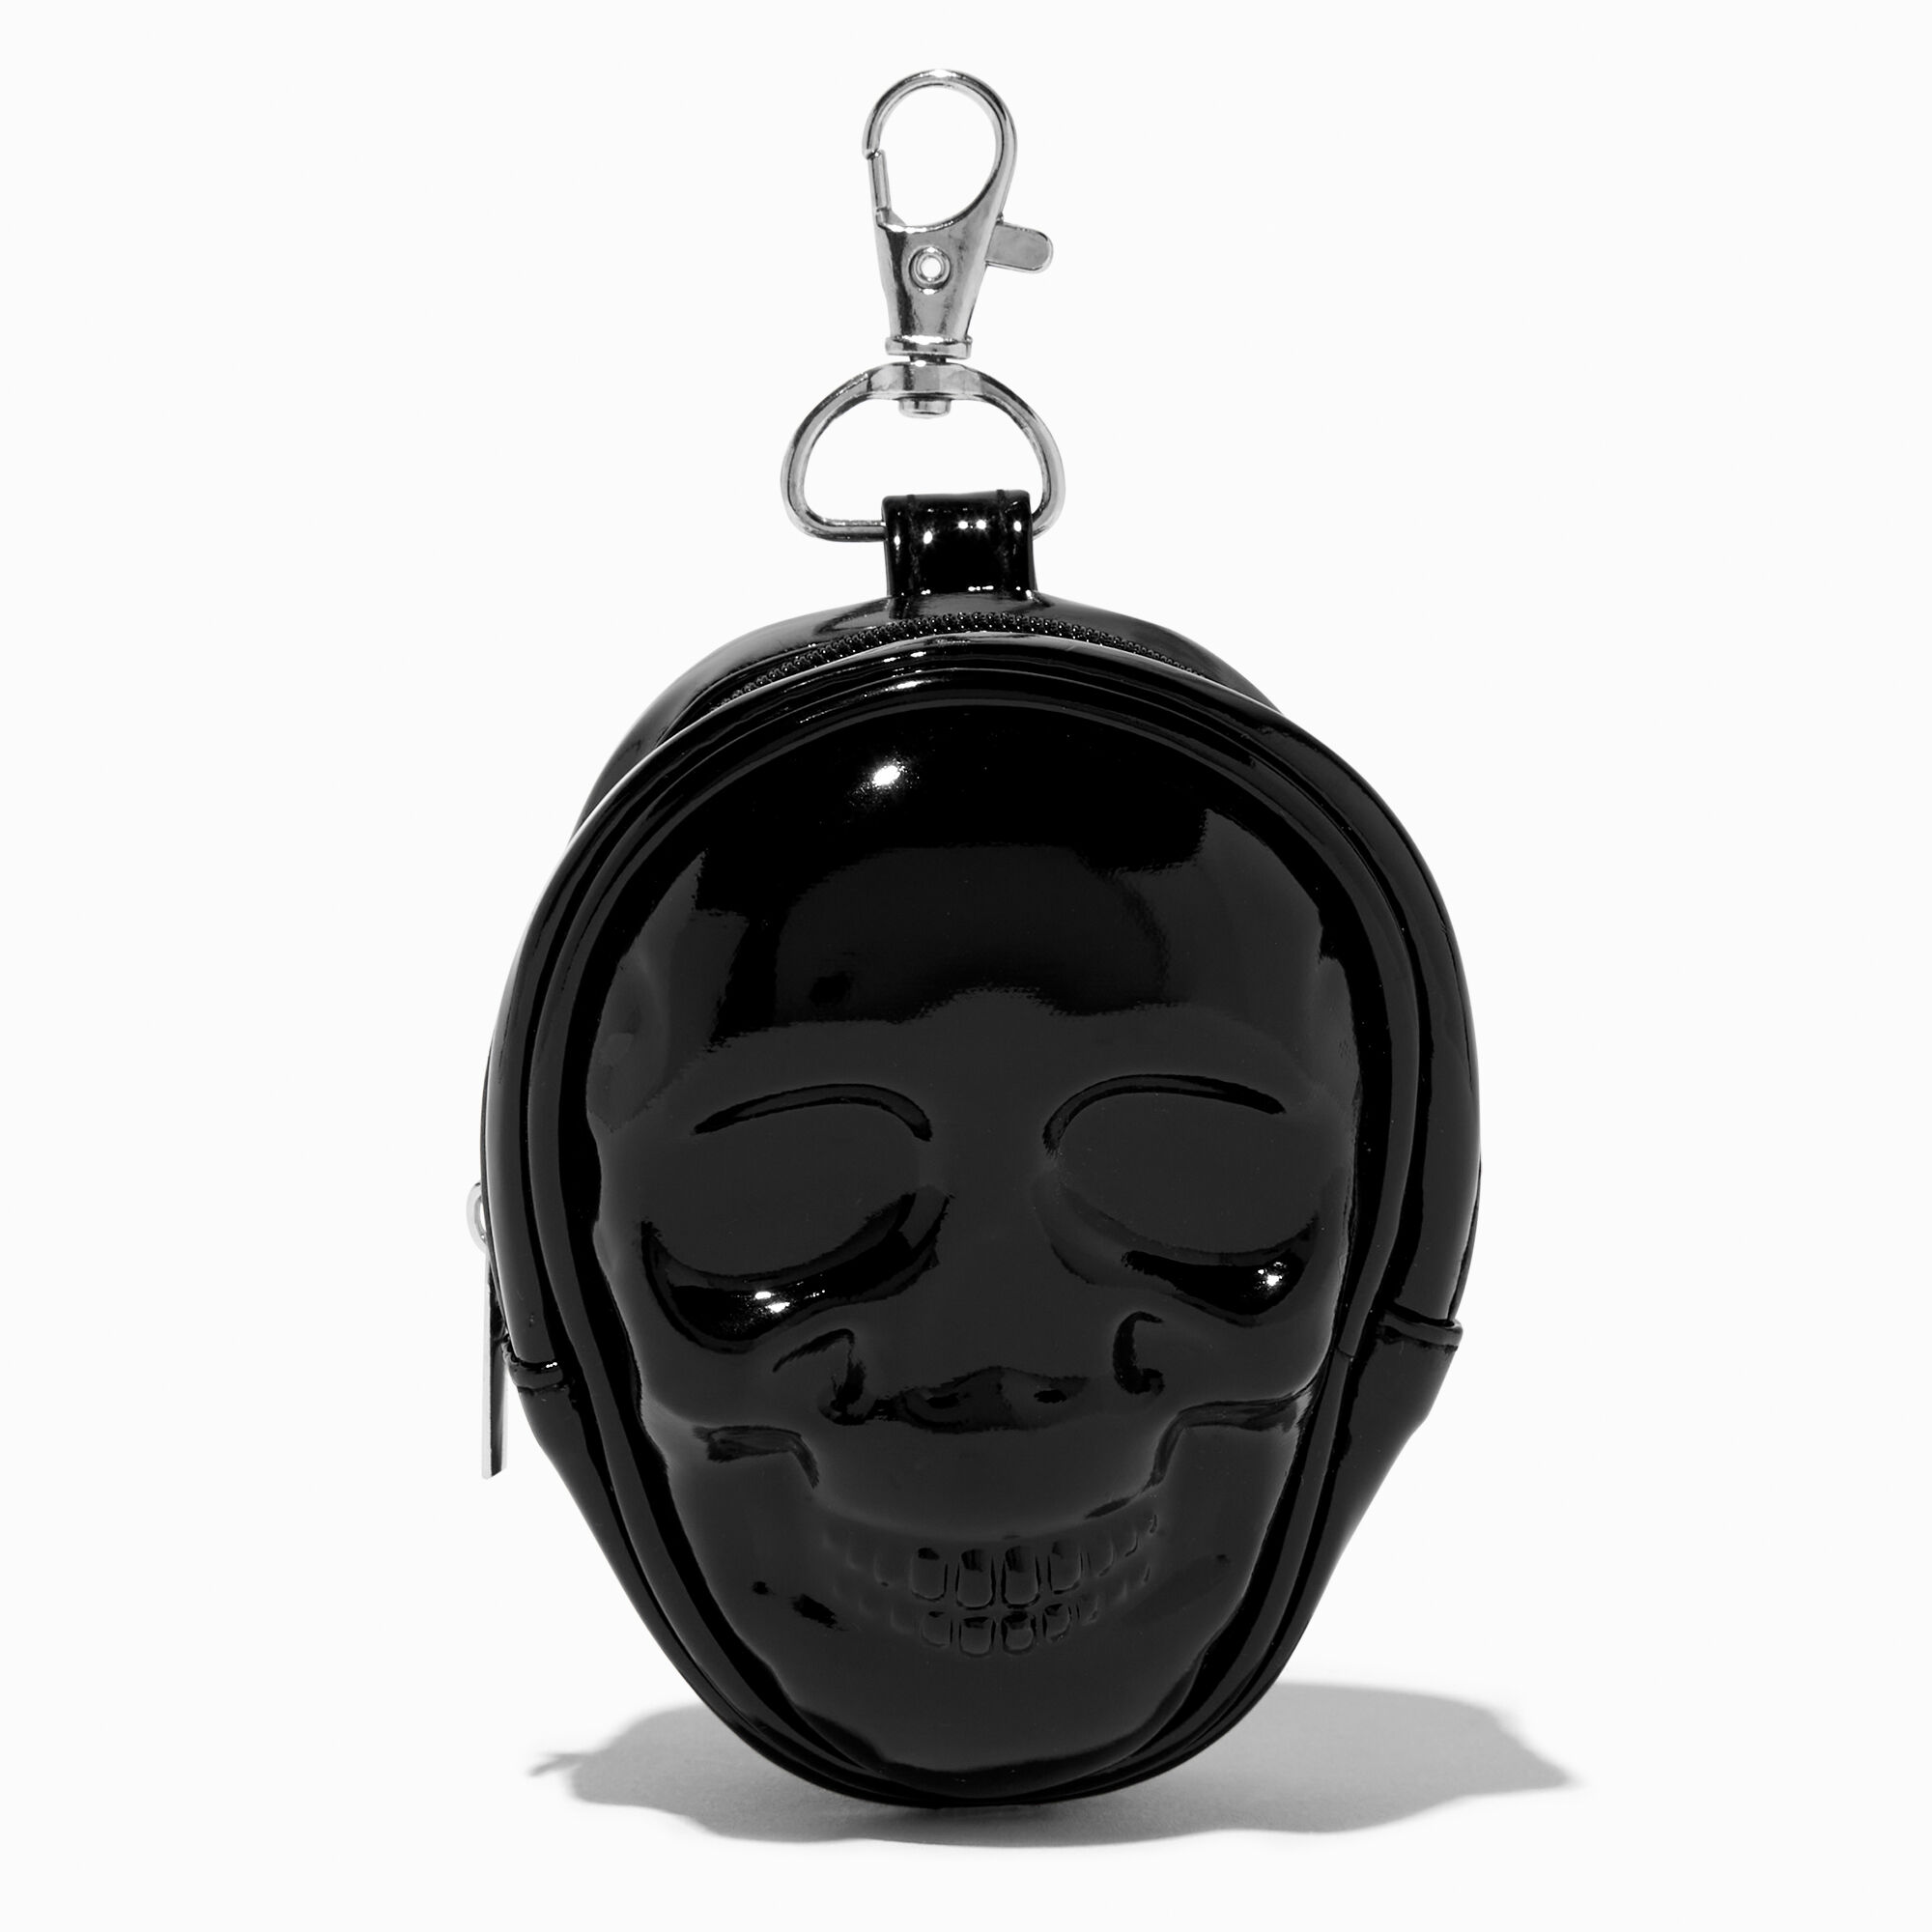 Keychain Coin Purse - Black – Relish New Orleans